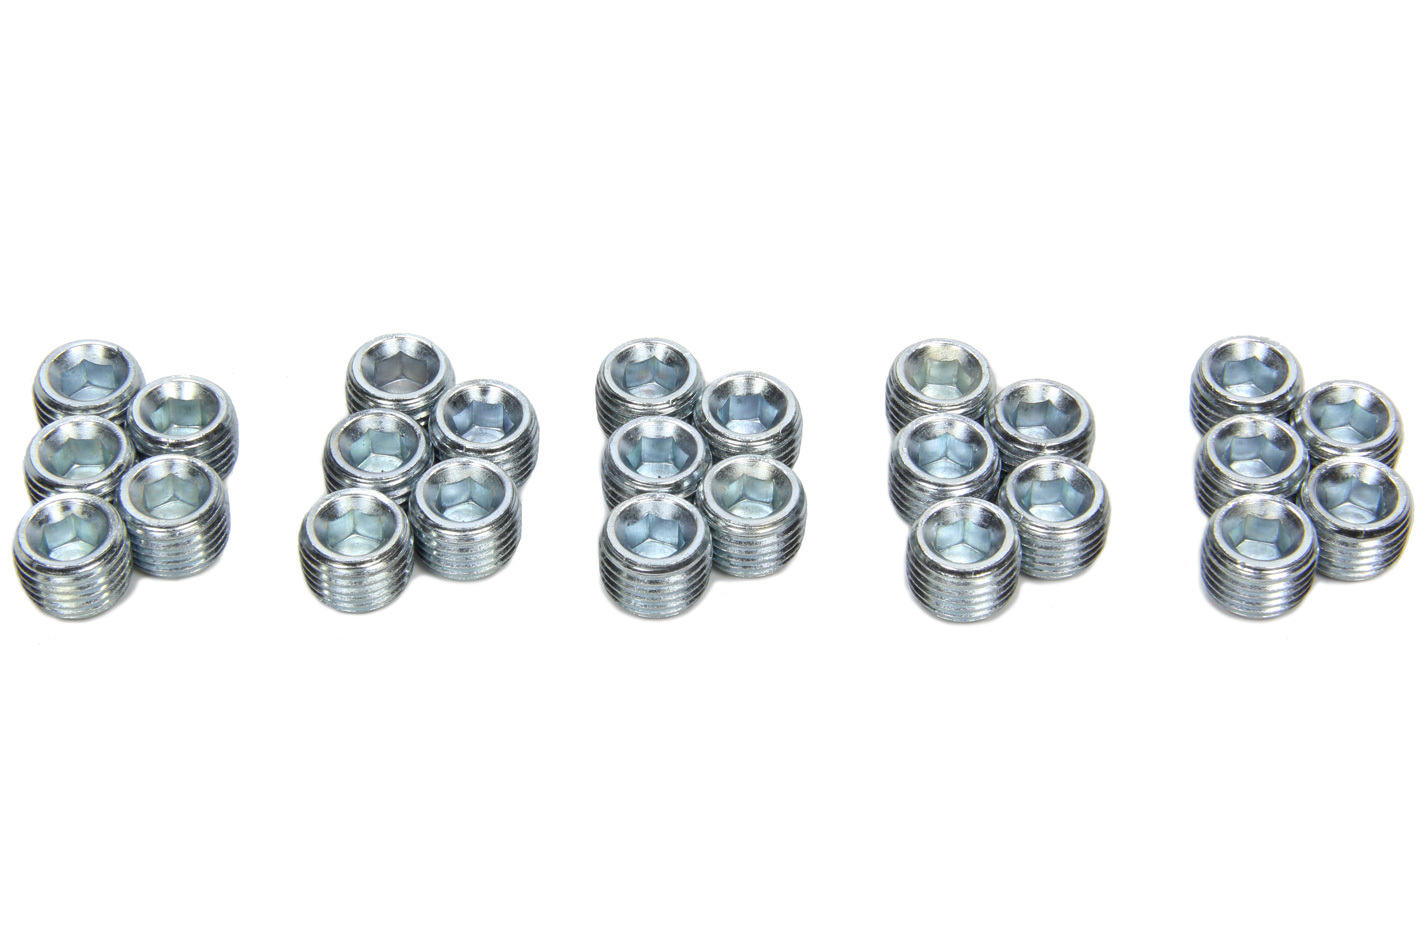 1/4-NPT Pipe Plugs 25pk w/Oil Relief Hole - PP-454-25